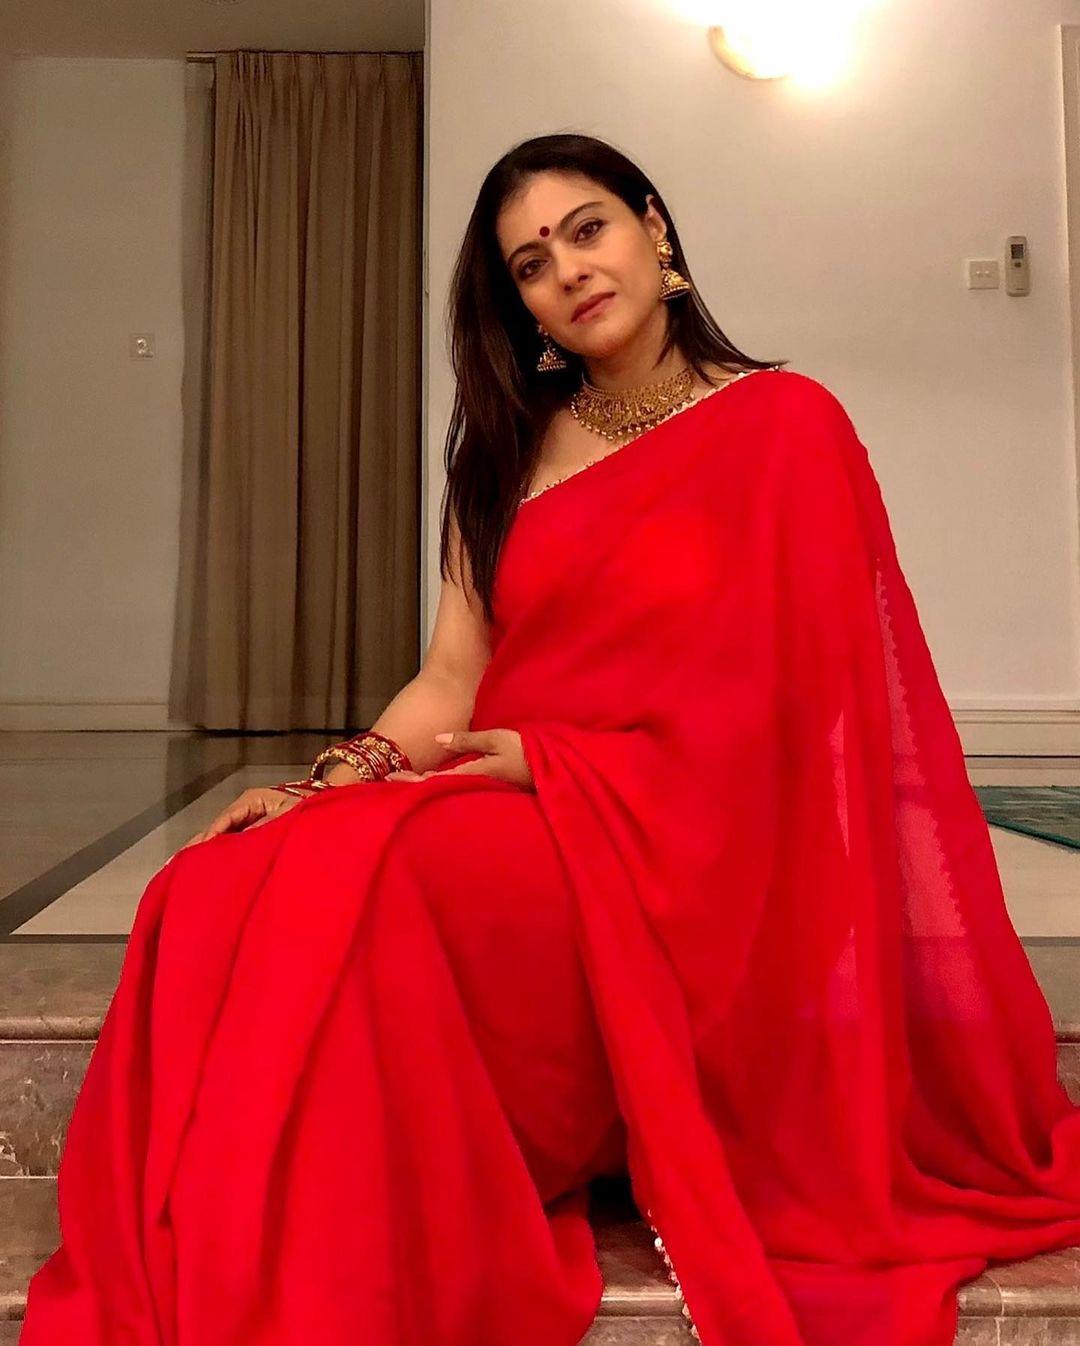 Bollywood actress Kajol devgan in red saree and sleeveless blouse hot photos | very glamorous and cute photos Photos: HD Images, Pictures, Stills, First Look Posters of Bollywood actress Kajol devgan in